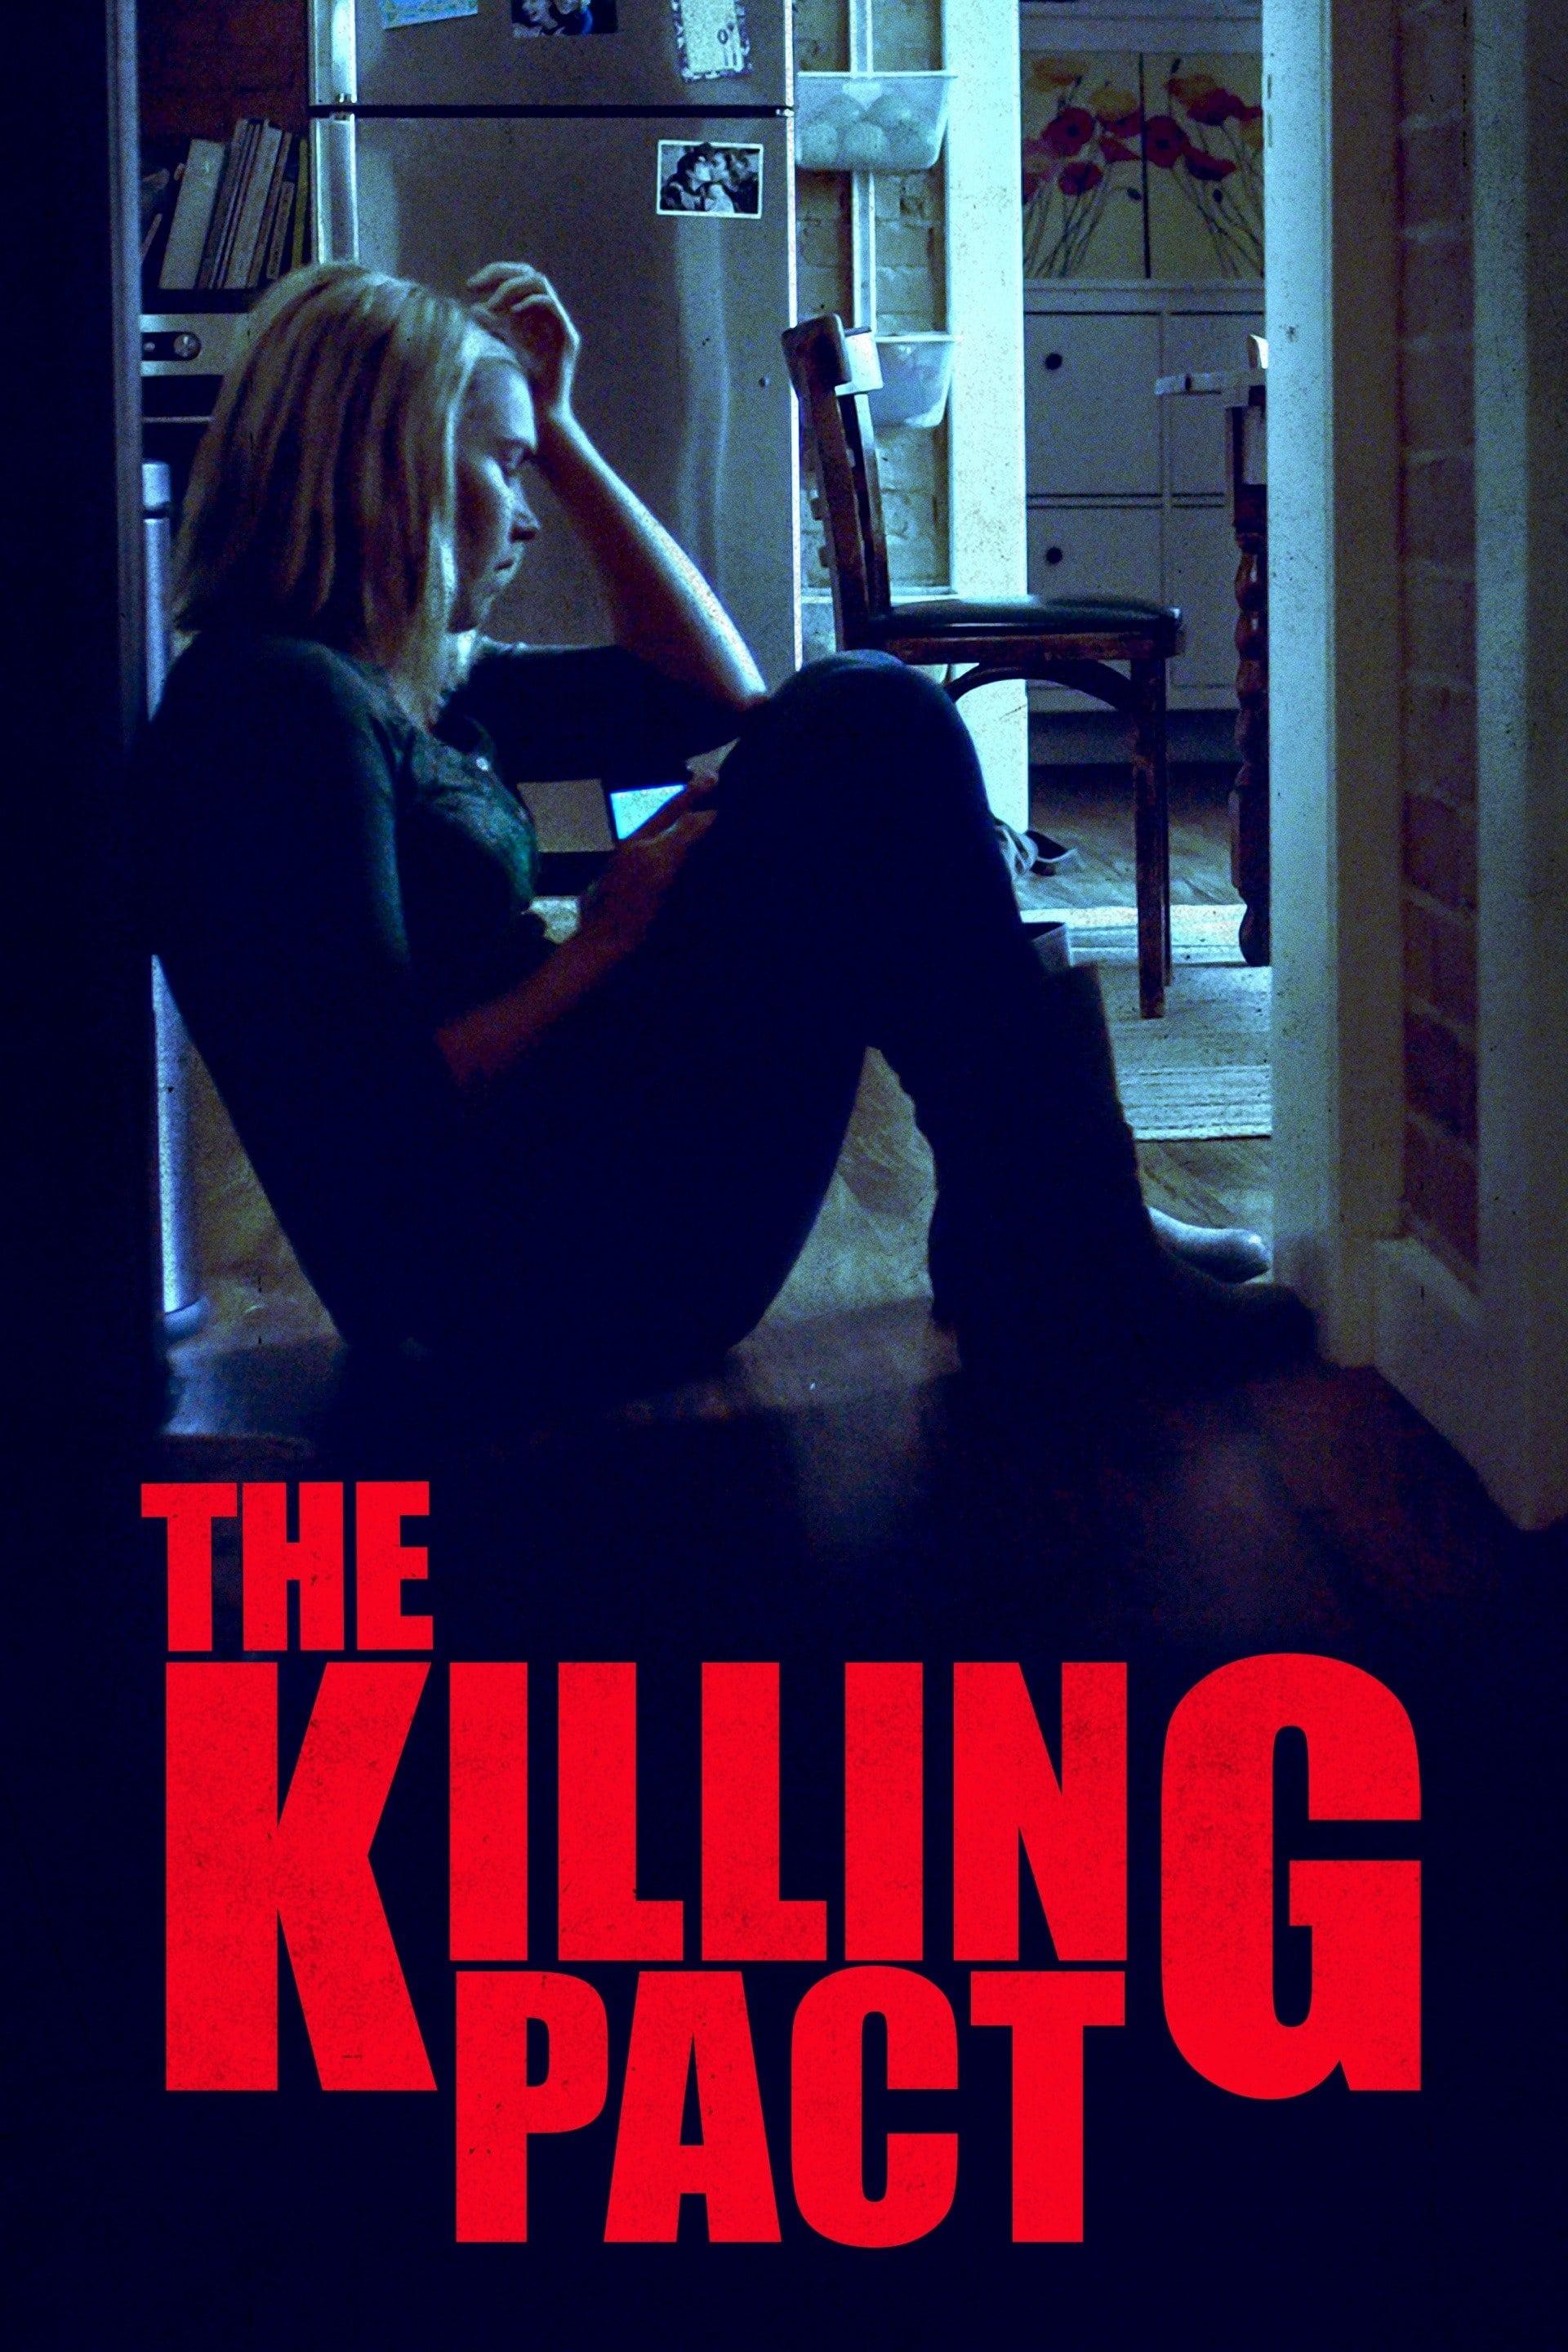 The Killing Pact poster